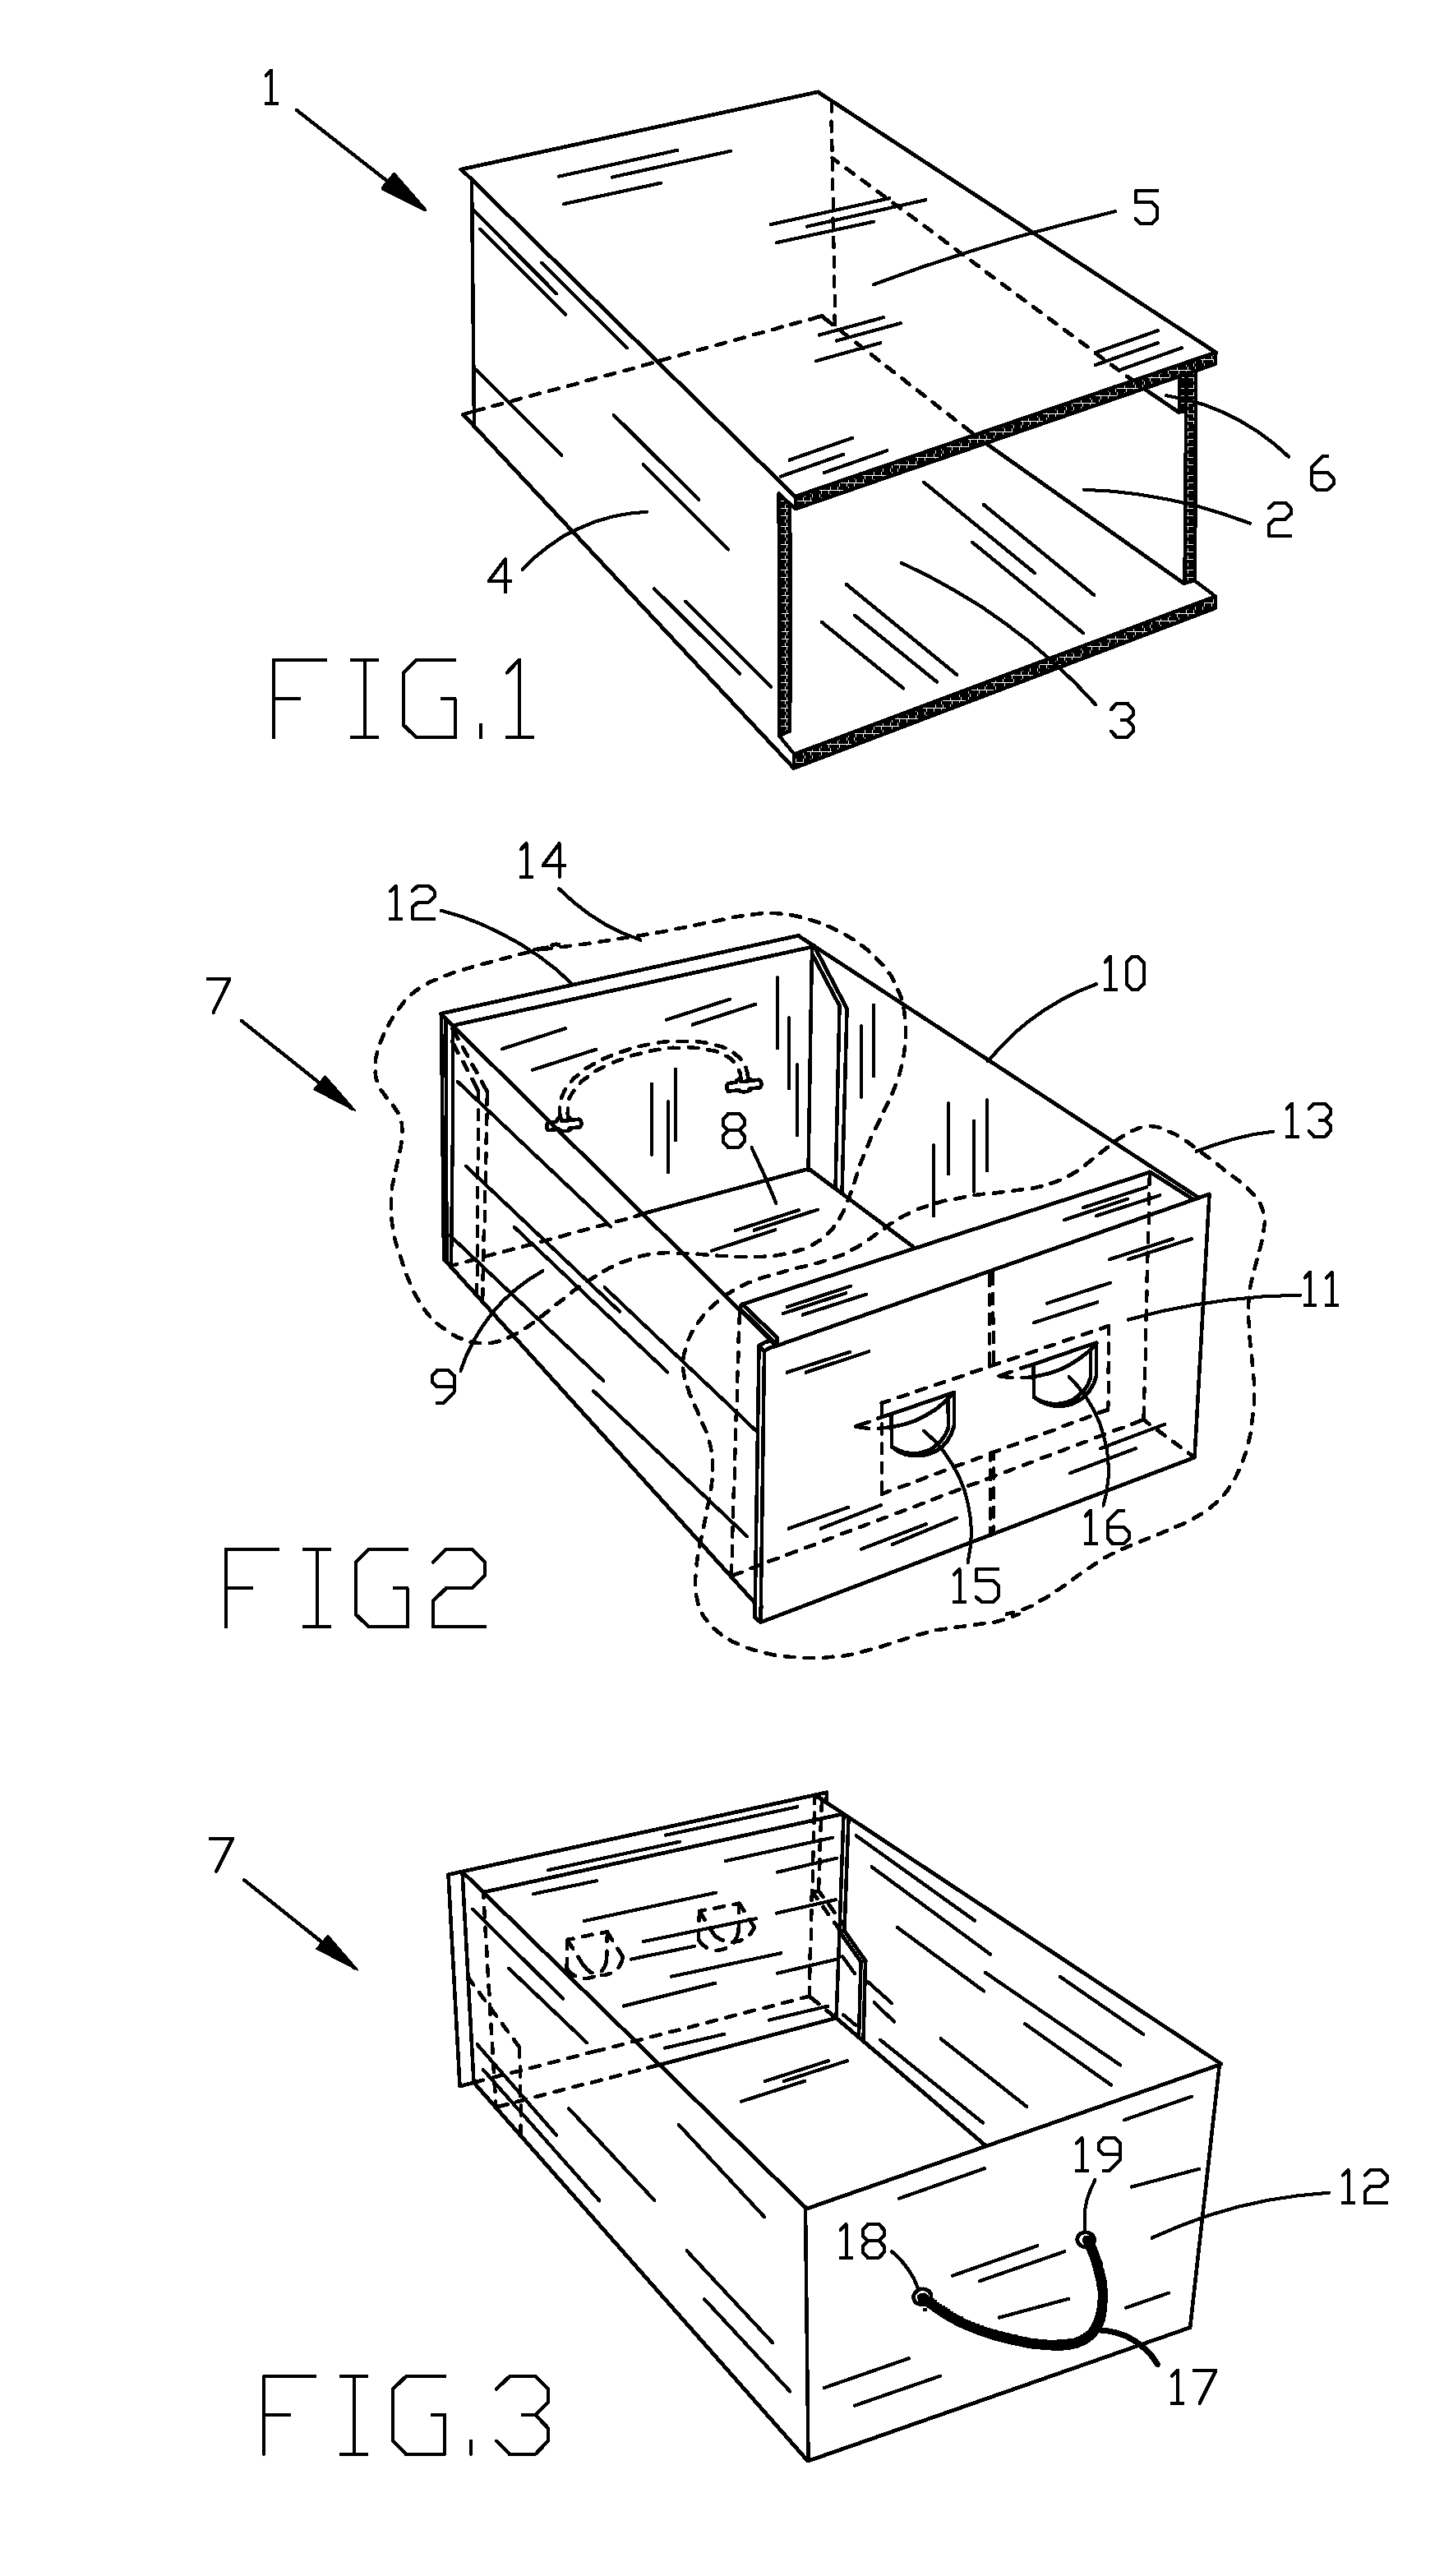 Modular cardboard container for objects requiring easy inspection, consisting of a stackable interchangeable hollow part or "tunnel" and and a pull-out drawer